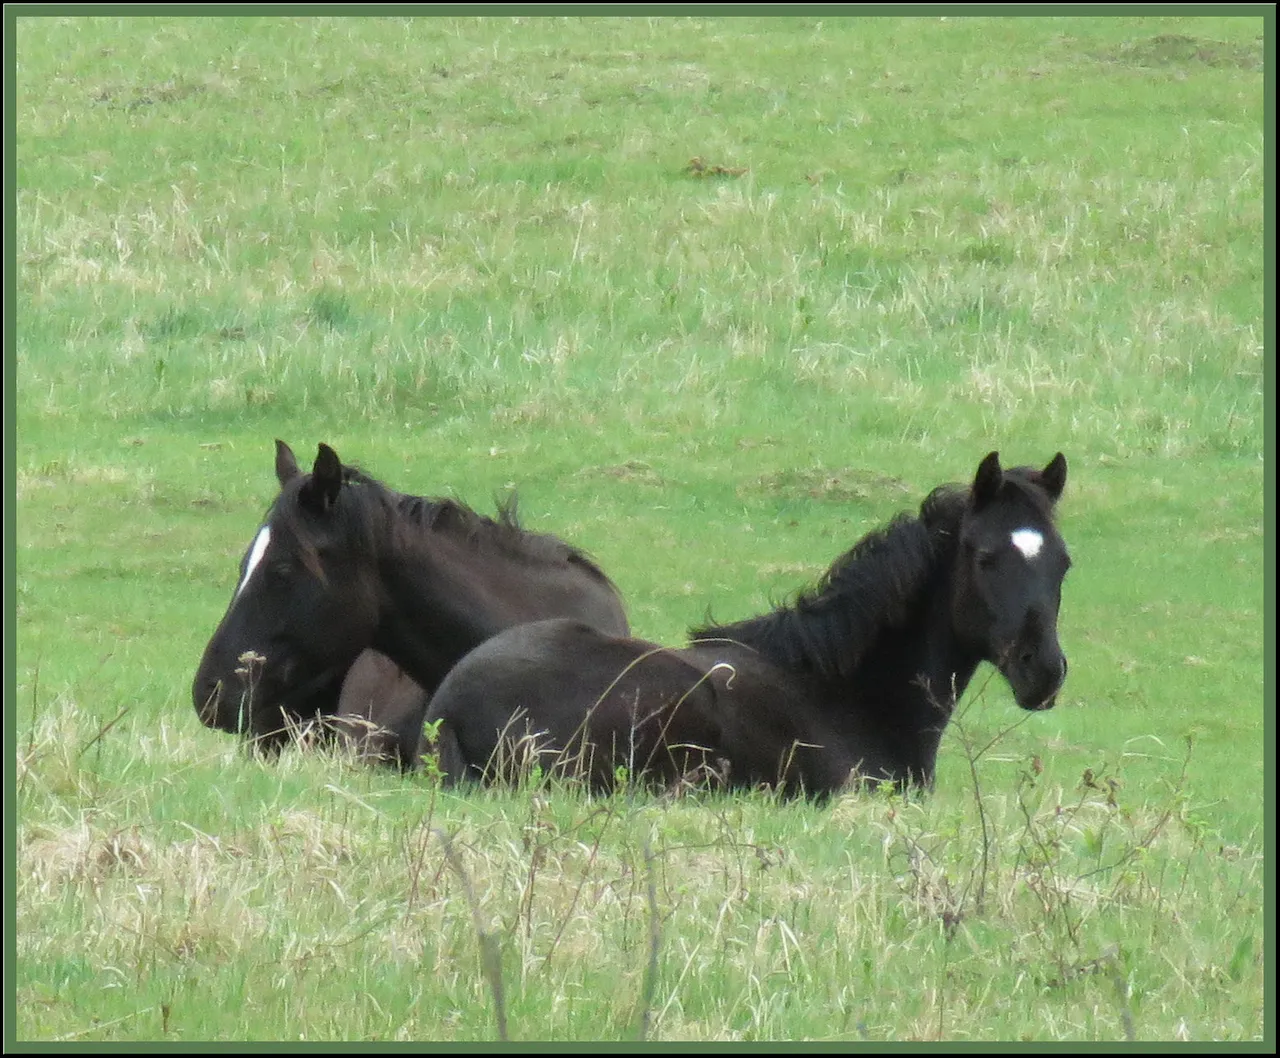 2 sister black horses laying together in the grass.JPG